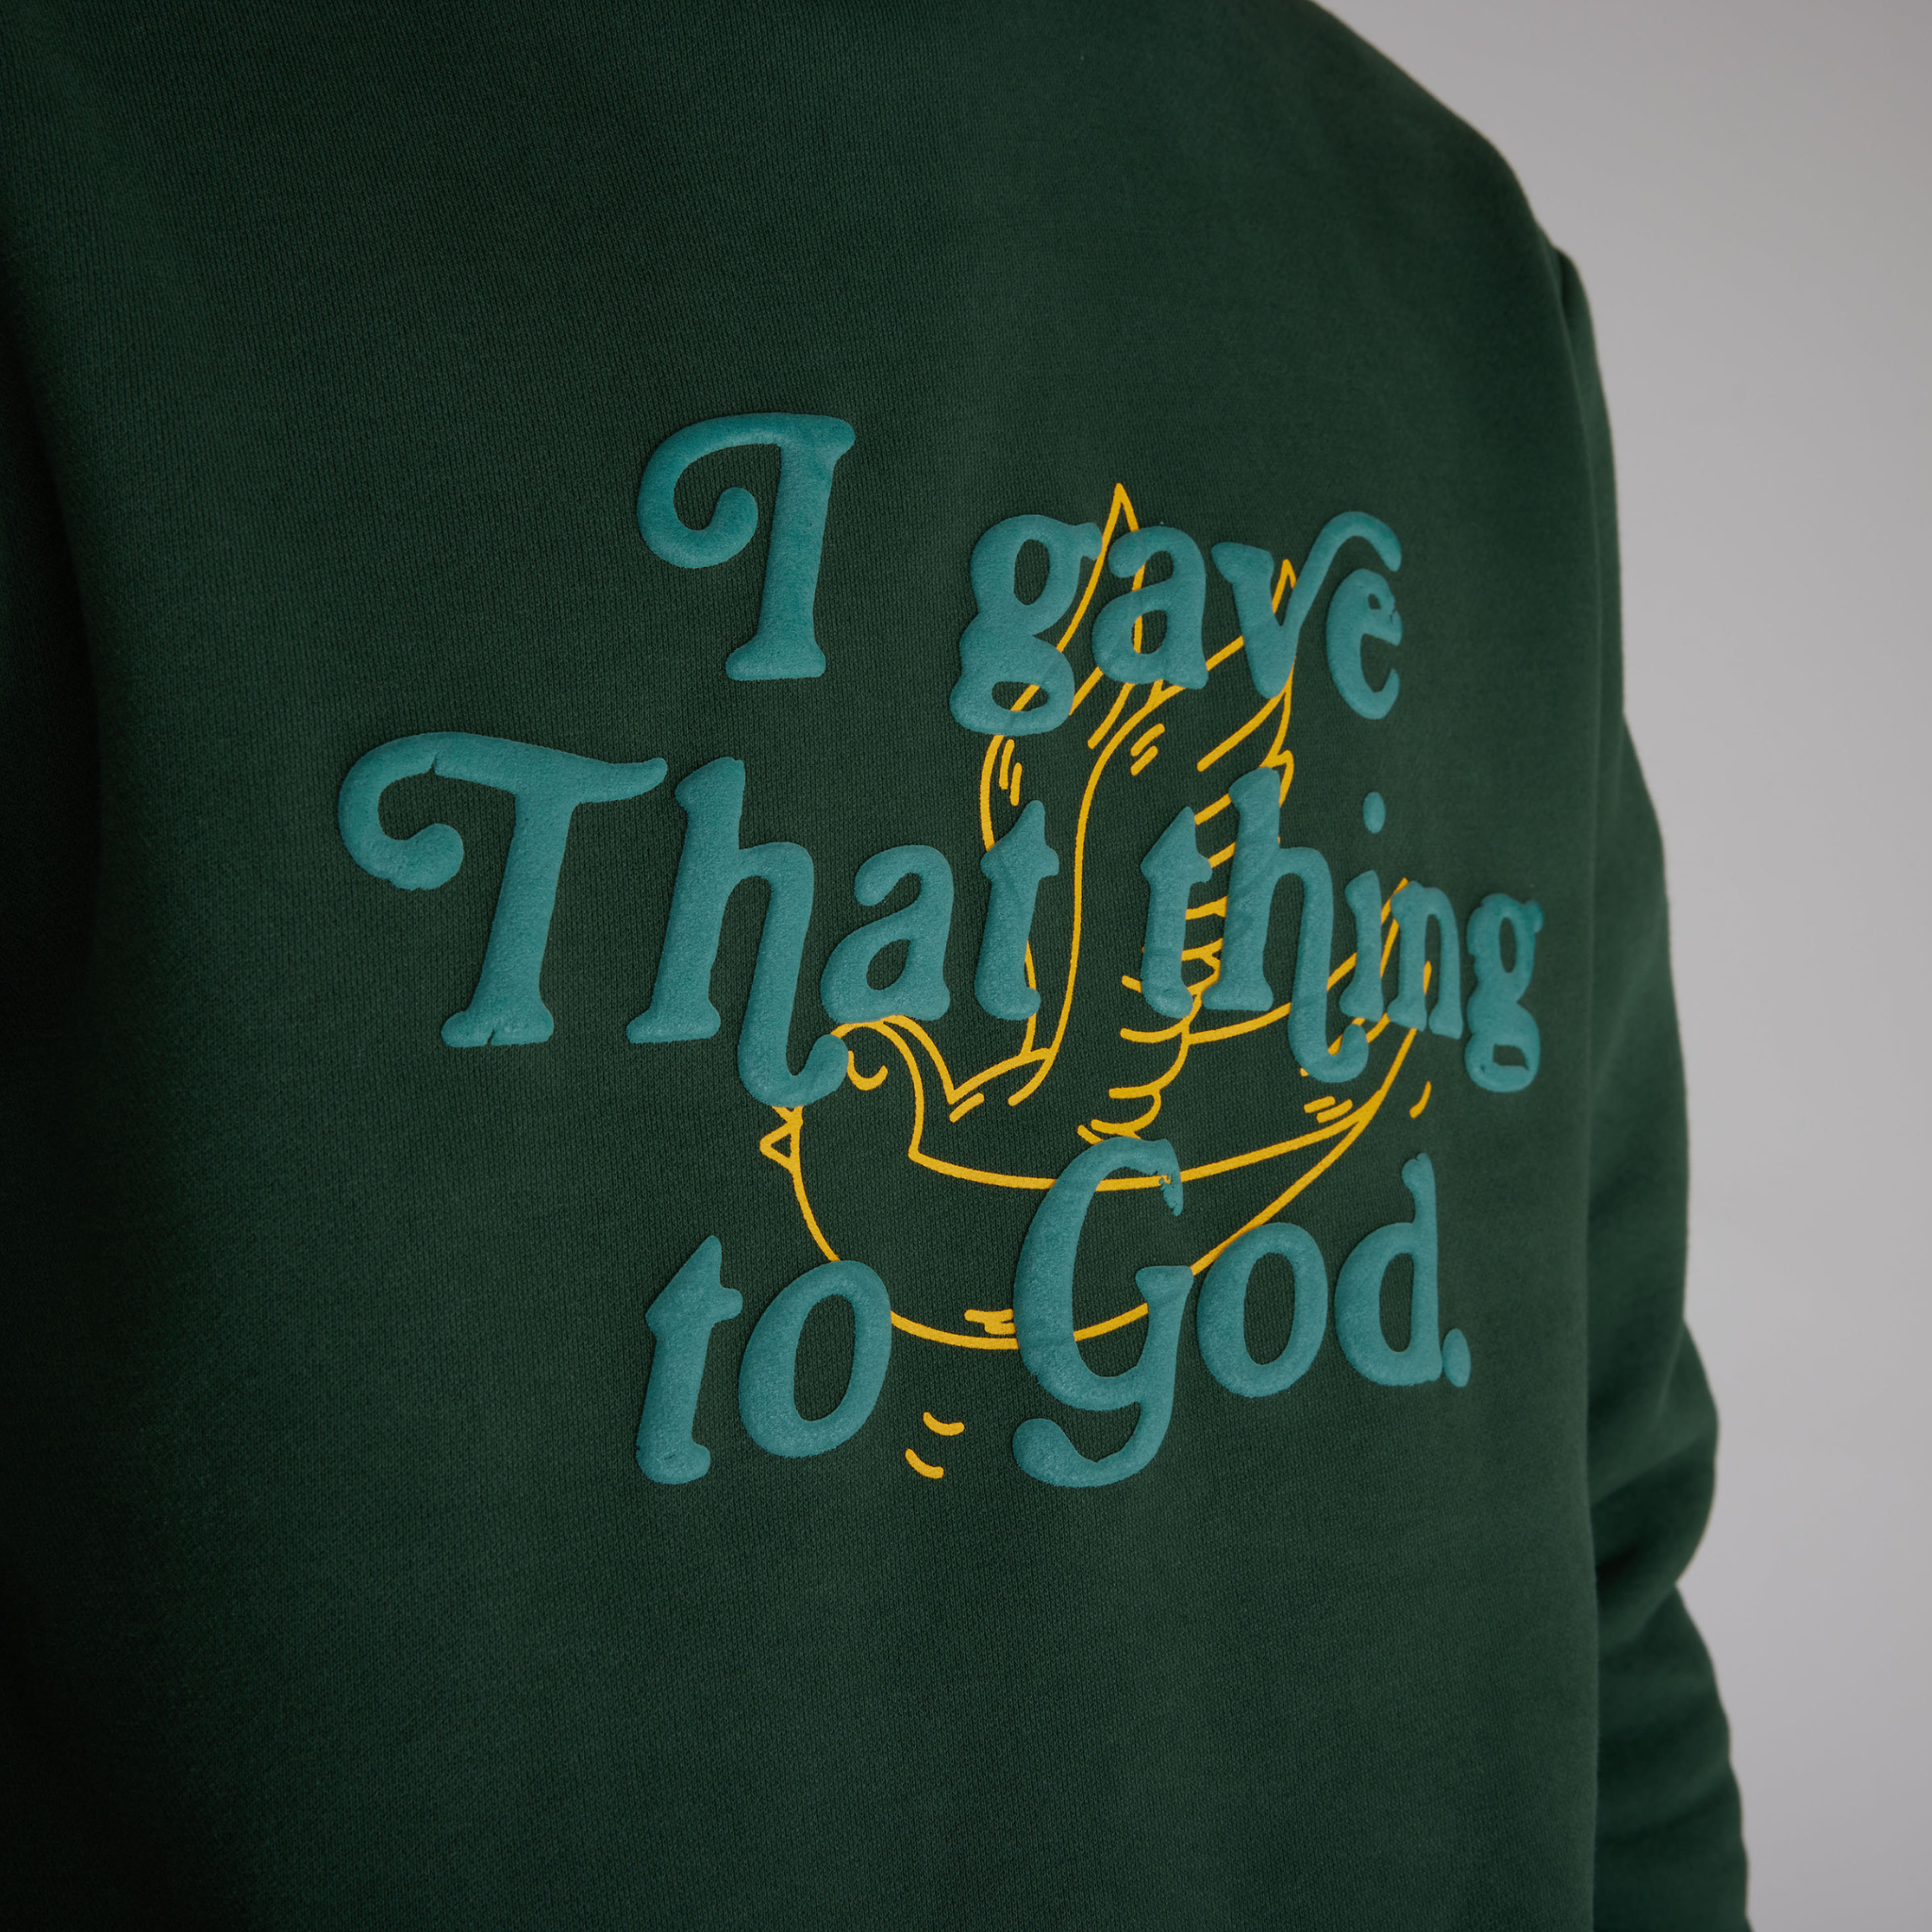 I Gave That Thing to God Hoodie